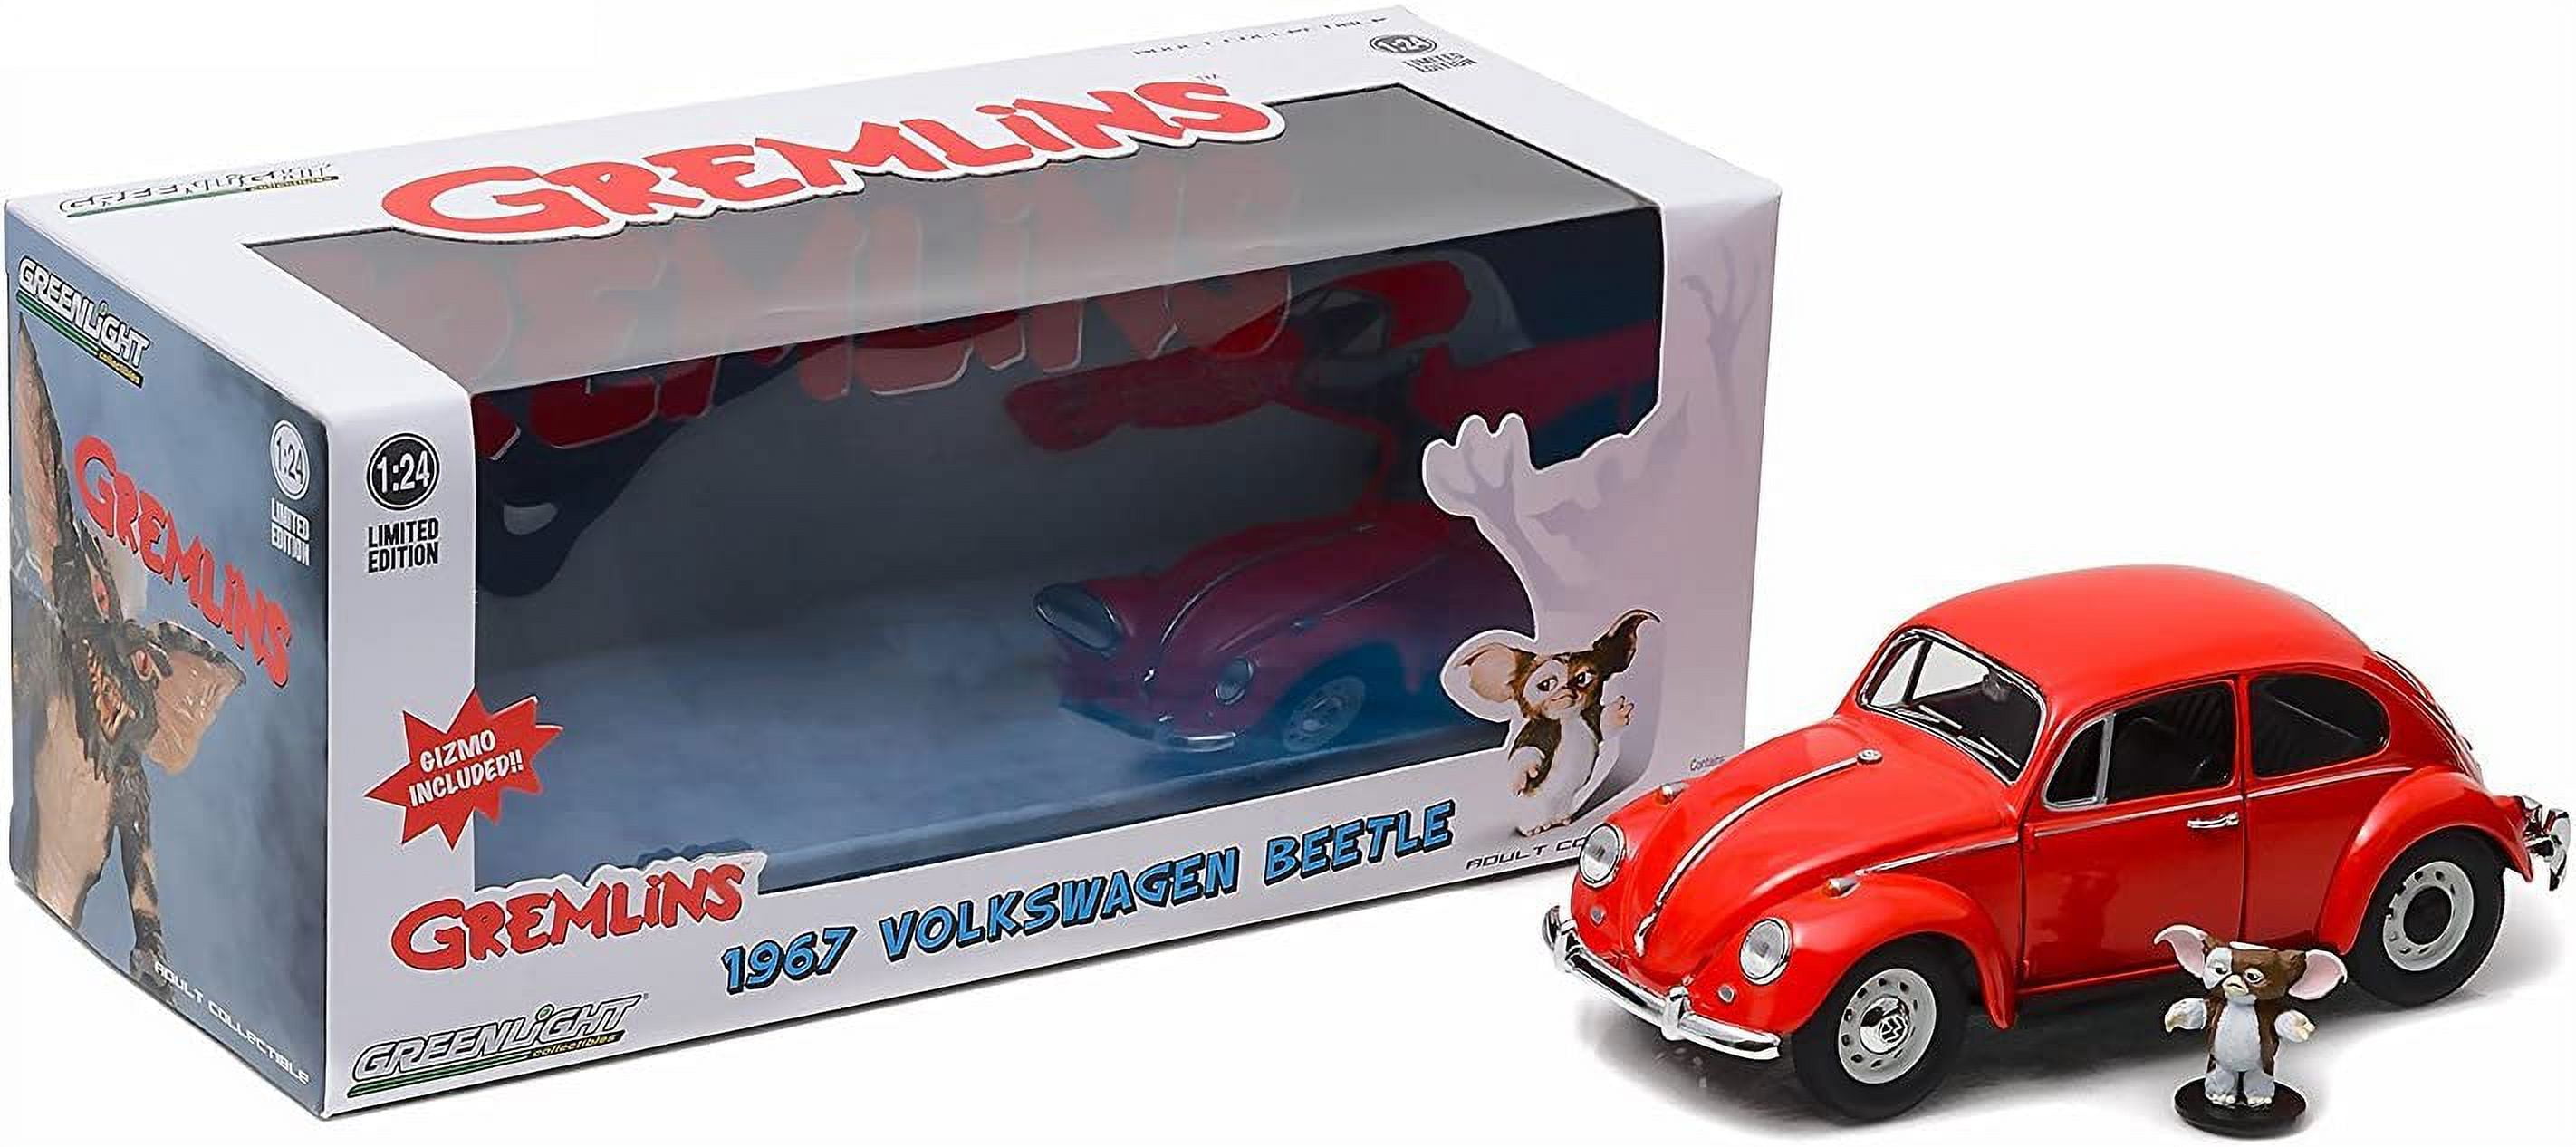 1967 Volkswagen Beetle Gremlins Movie (1984) with Gizmo Figure 1/24 Diecast  Model Car by Greenlight